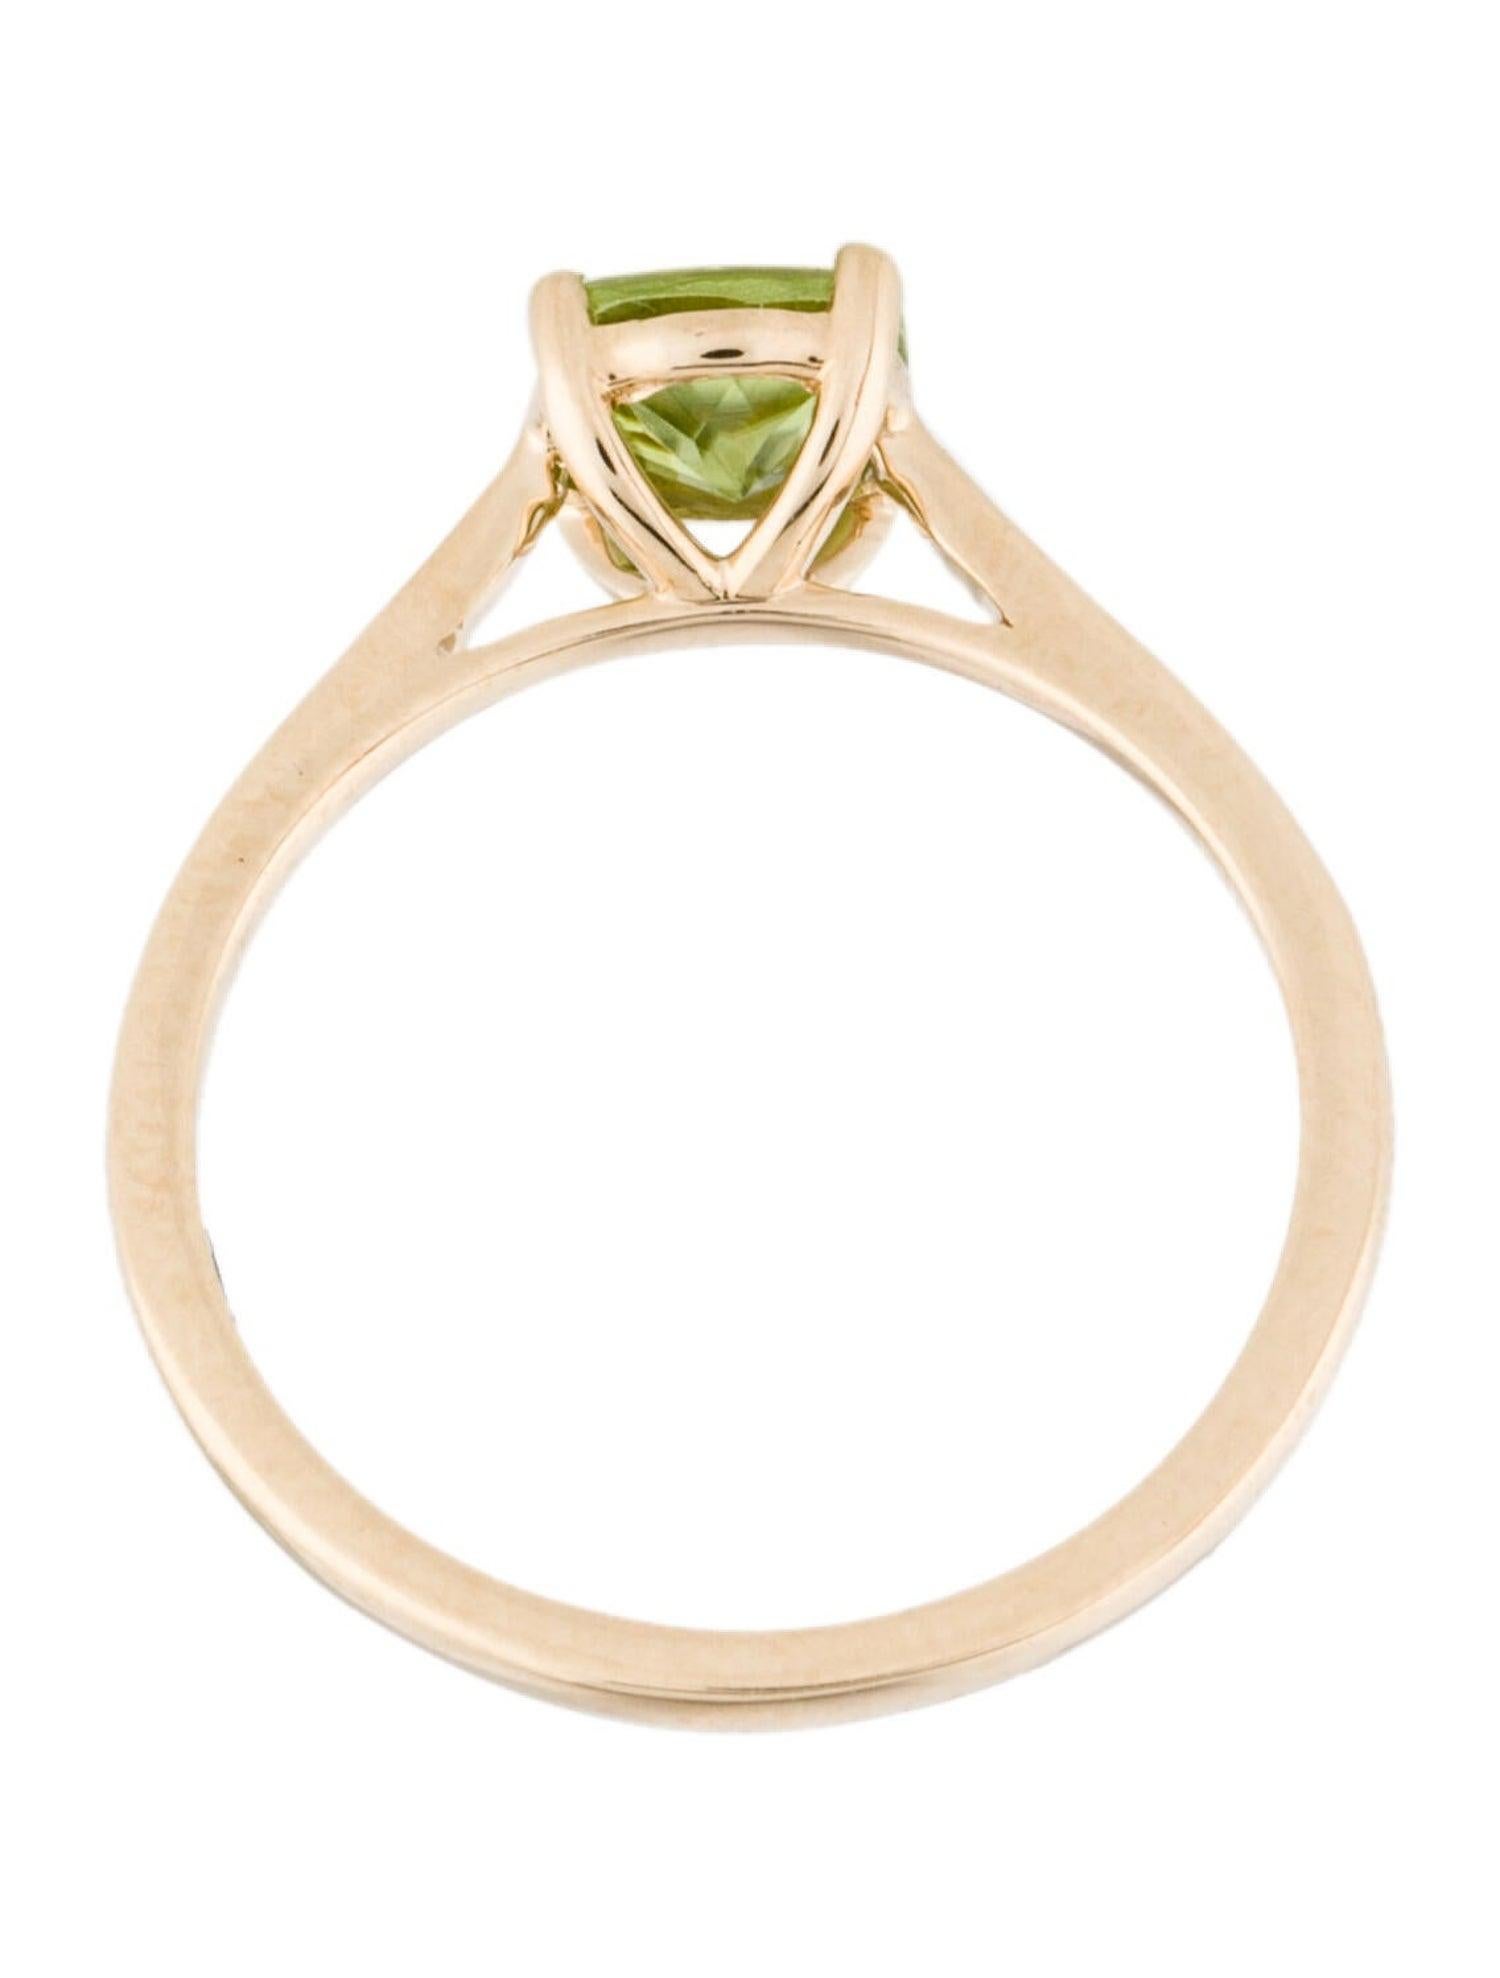 Exquisite 14K Peridot Solitaire Cocktail Ring - Size 6.75 - Elegant & Timeless In New Condition For Sale In Holtsville, NY